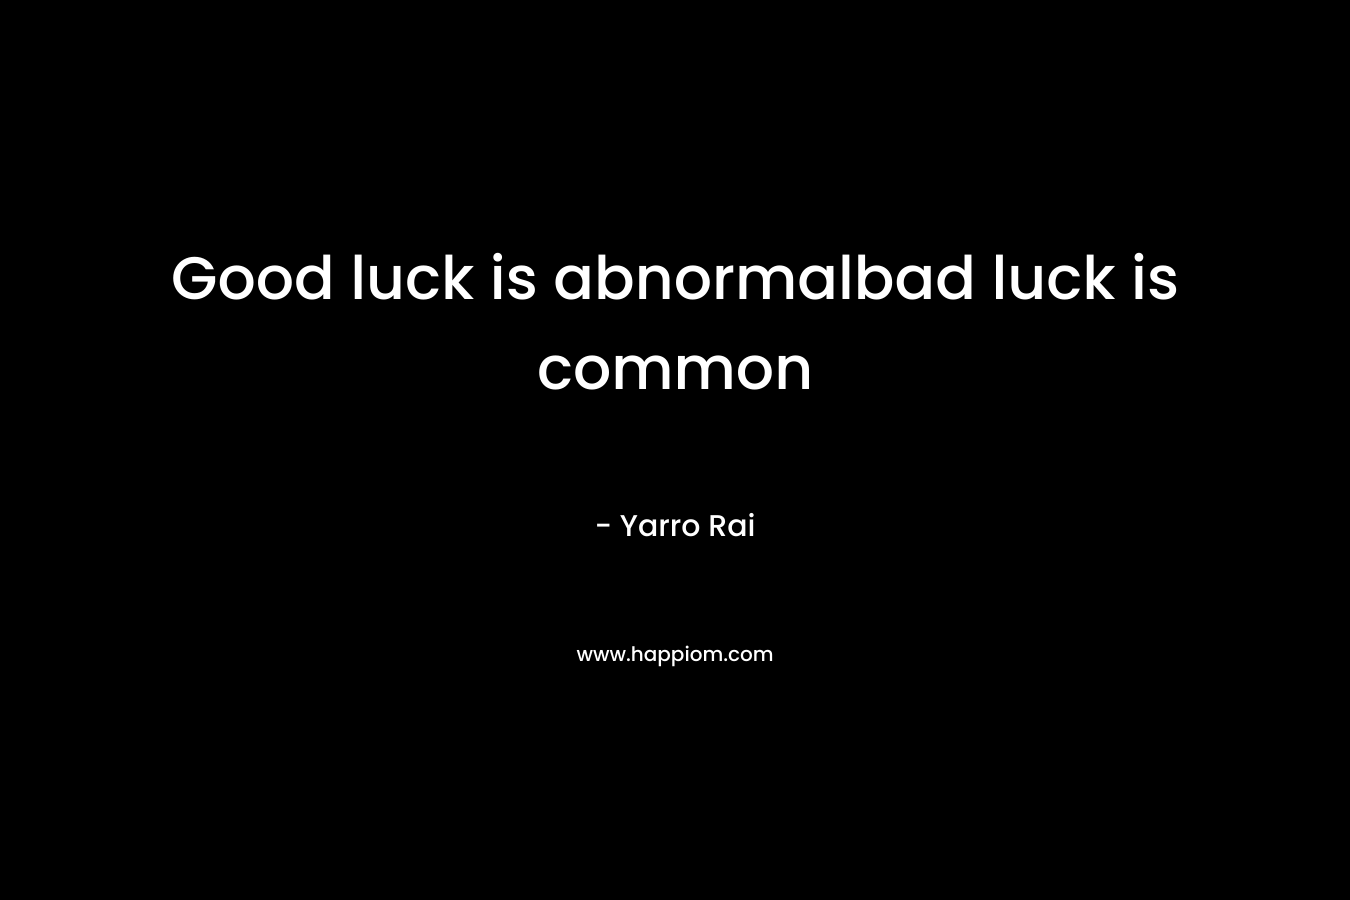 Good luck is abnormalbad luck is common